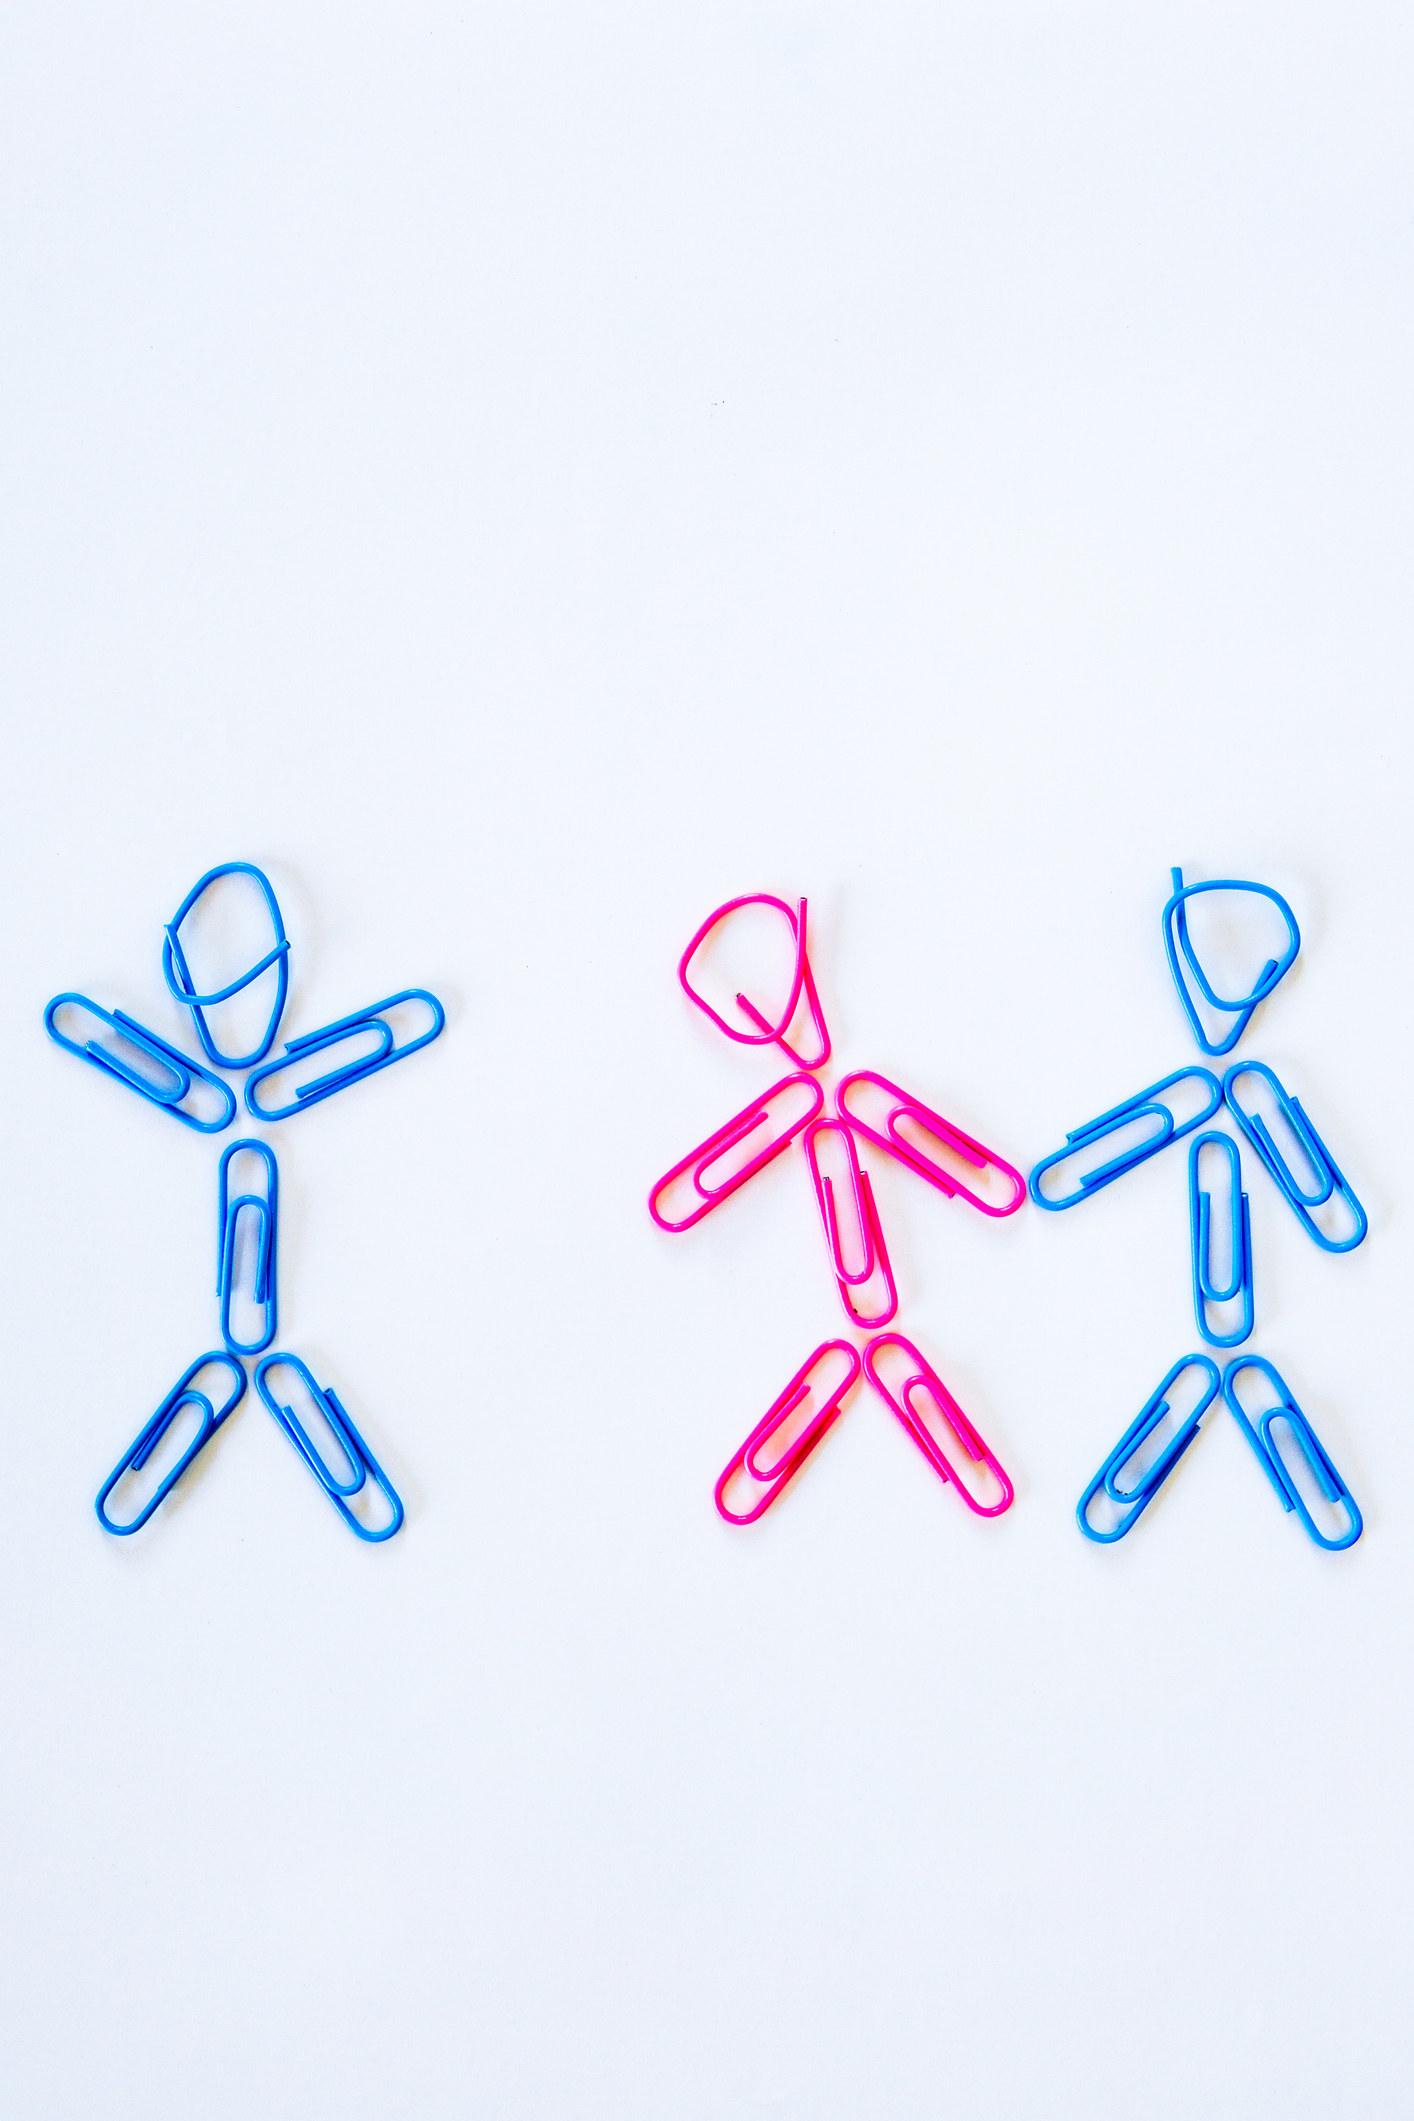 a stick figure couple made of paper clips together, then one of the figures reaching towards another third stick figure